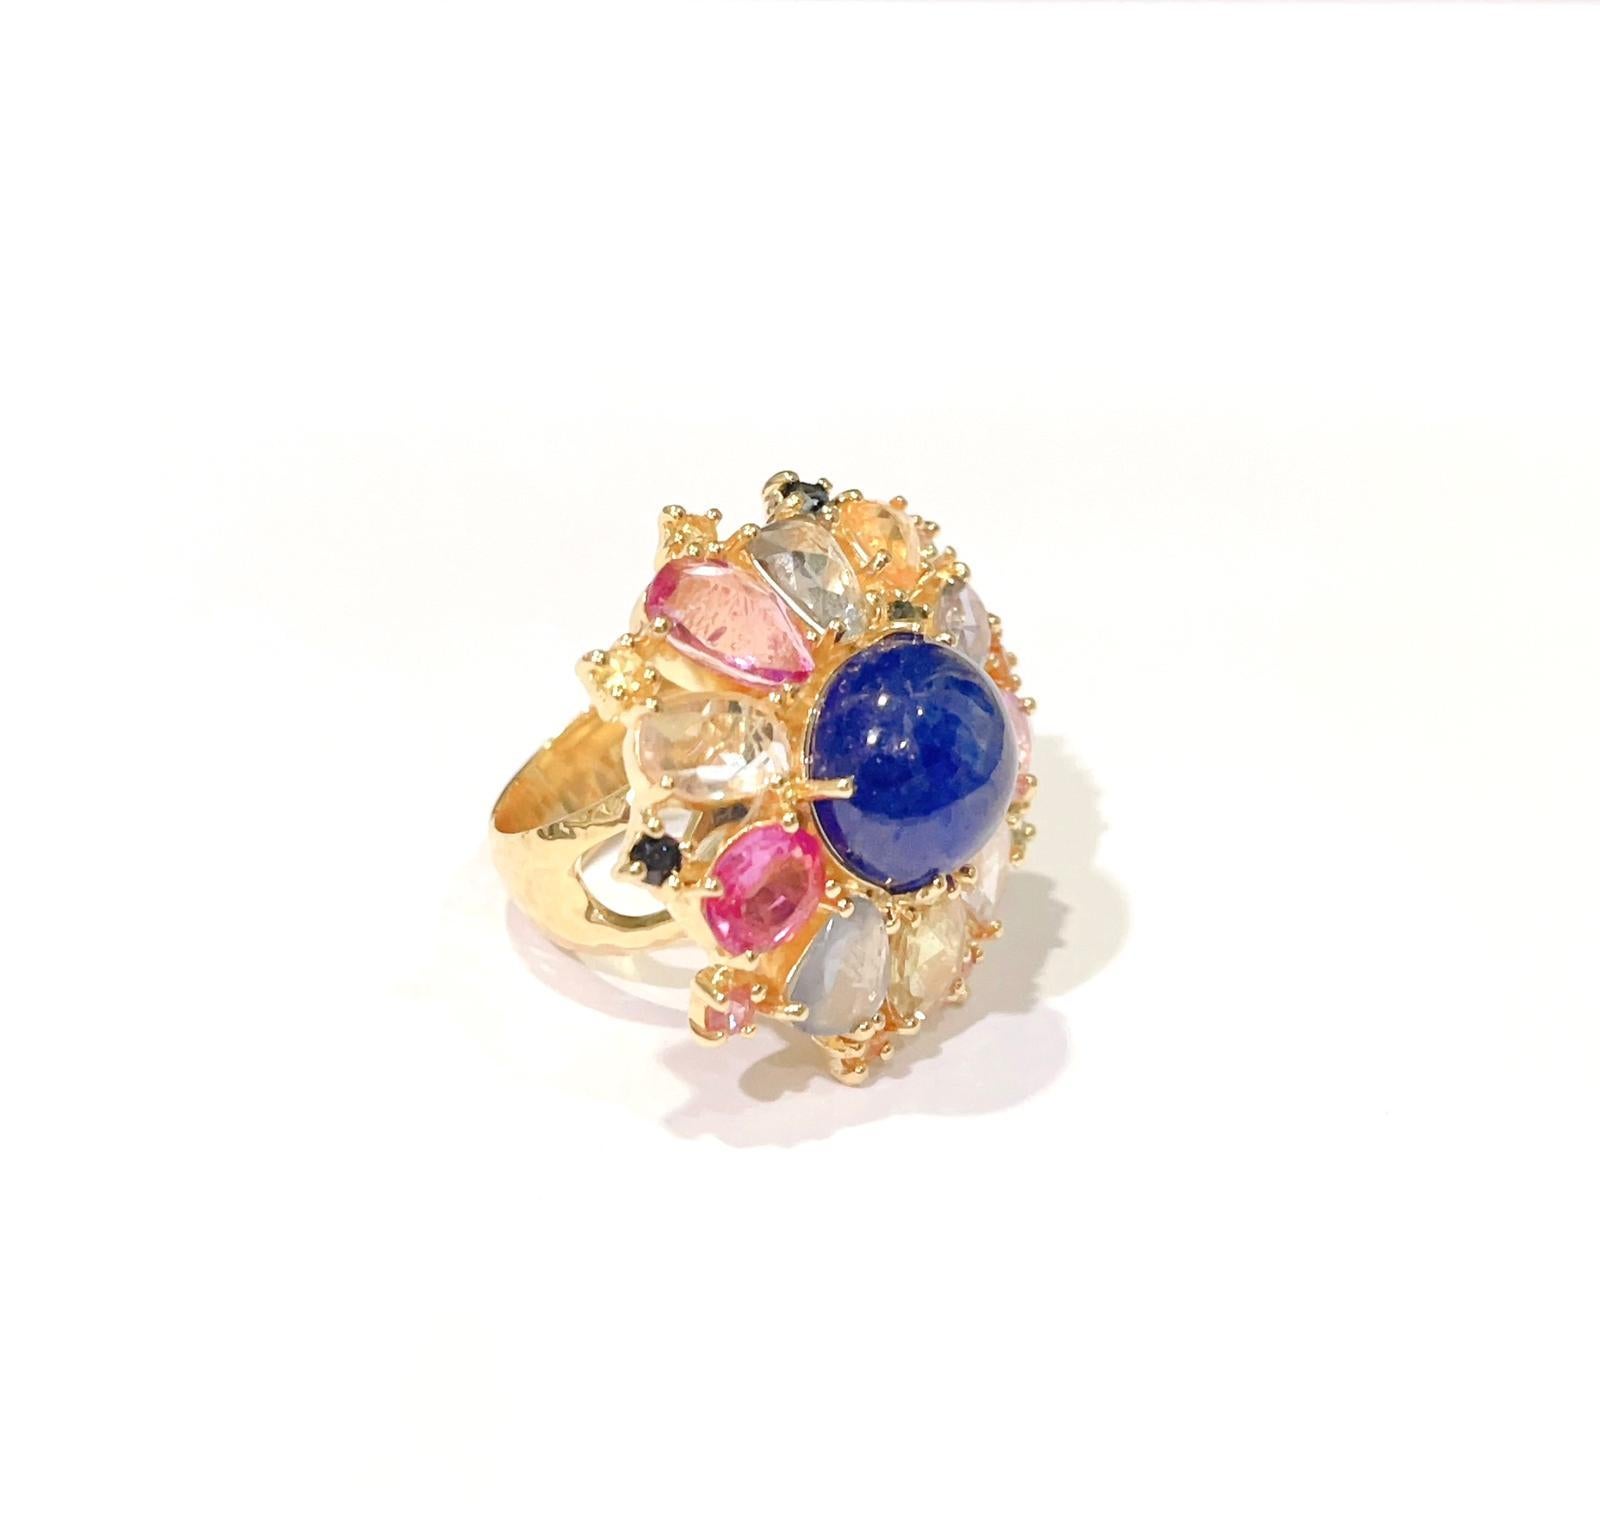 Women's Bochic “Capri” Blue & Rose Cut Sapphires Cocktail Ring Set in 18k Gold & Silver For Sale